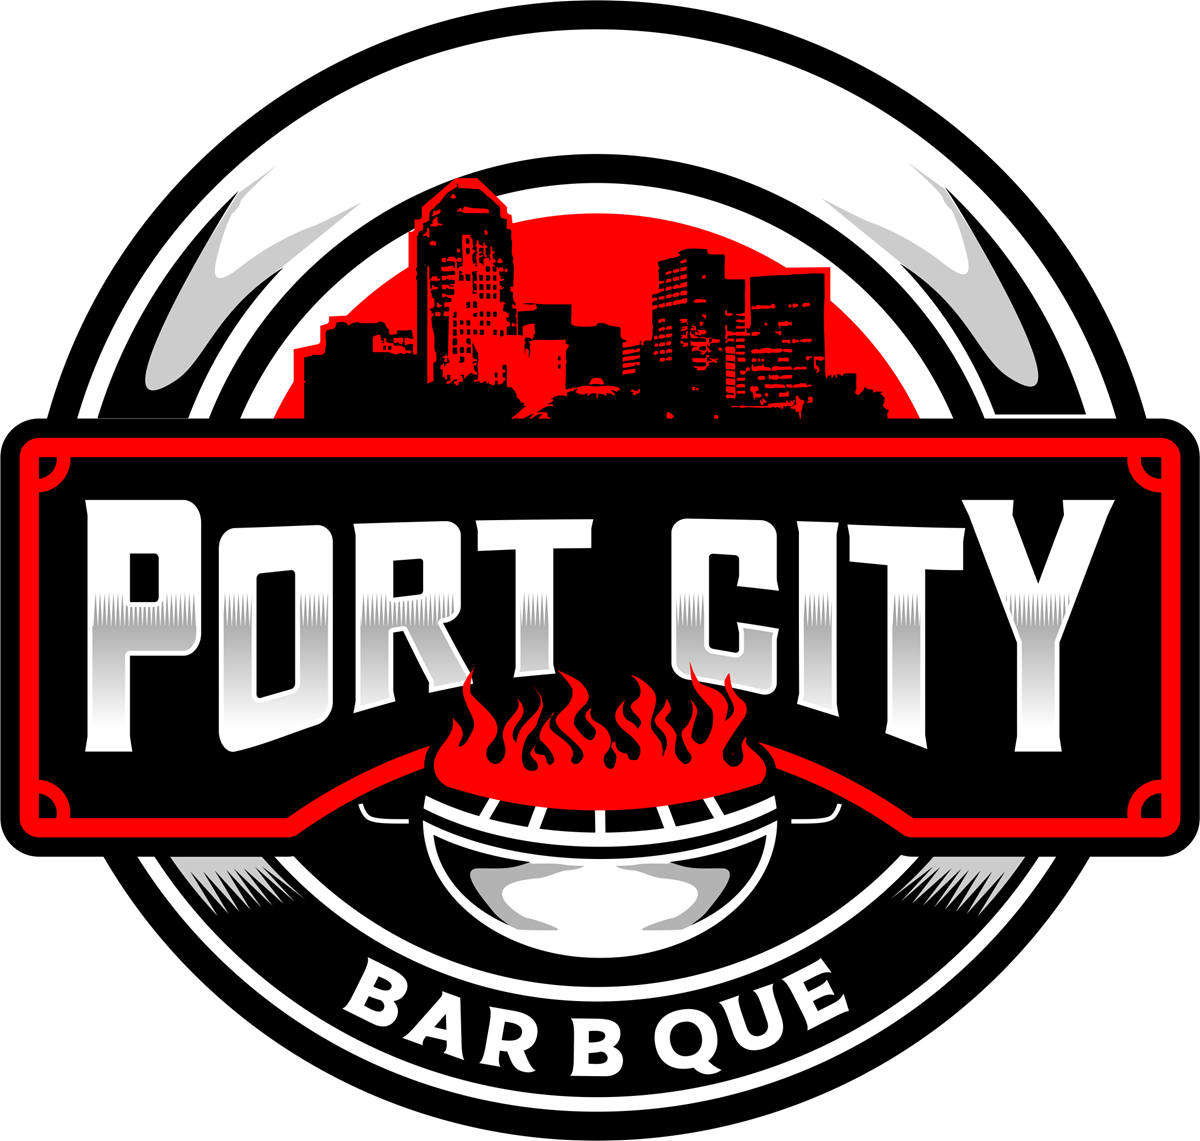 Port City Barbecue - Homepage